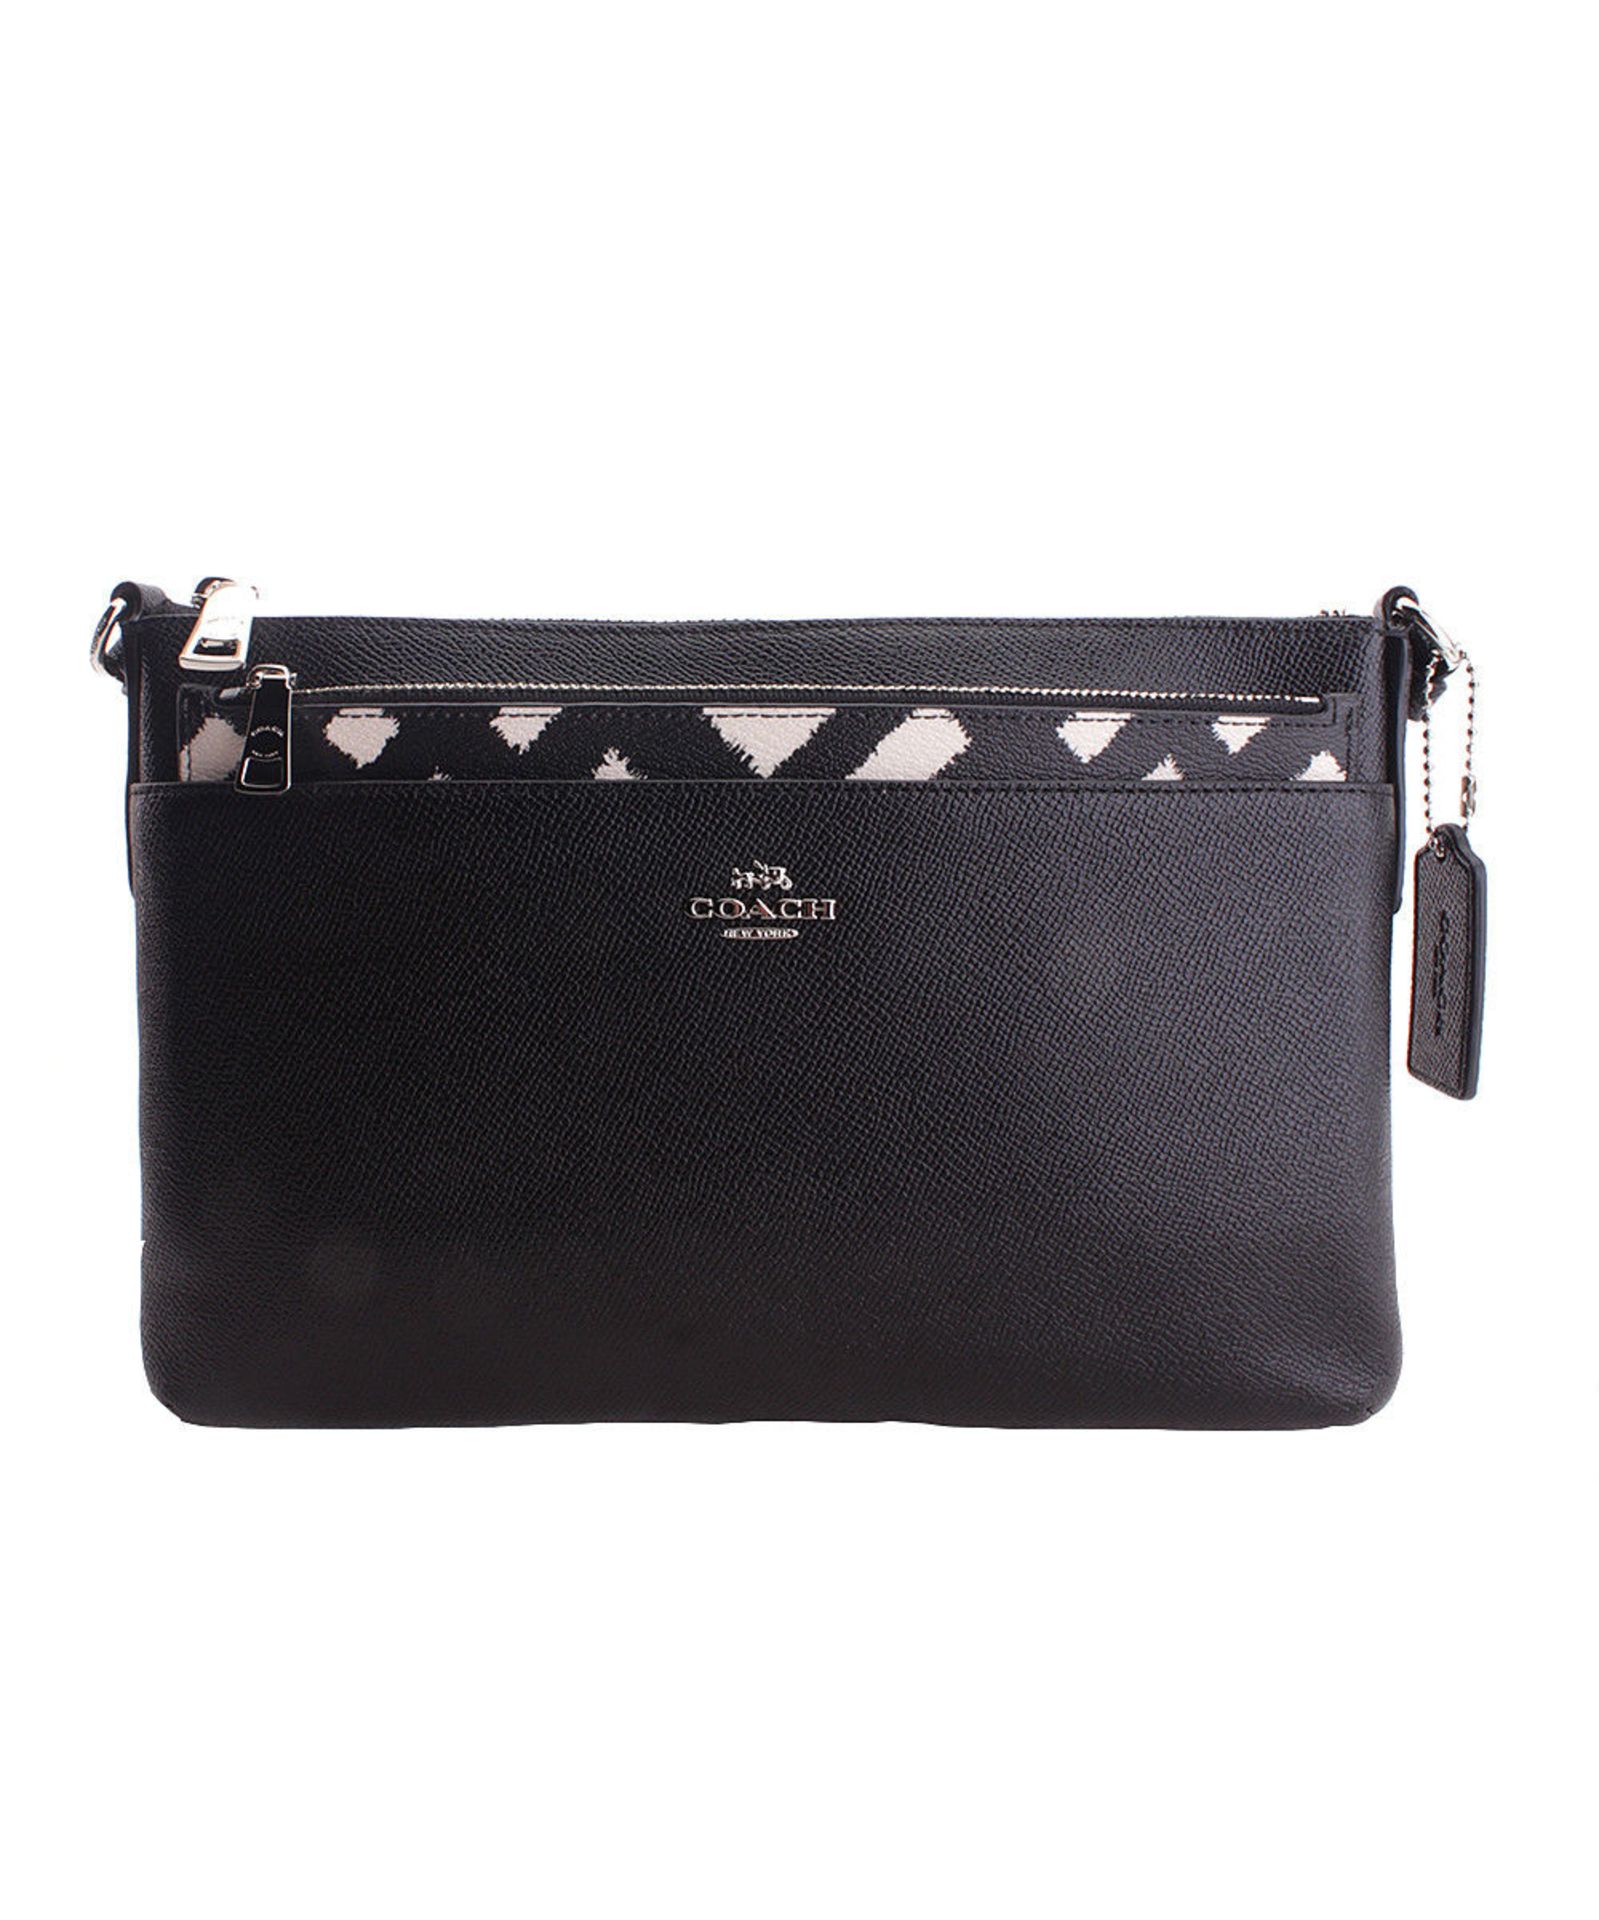 Coach, Black & White Geometric-Accent Crossbody Bag (New With Tags) [Ref: 54217581 Tf Tub 1-Tf]